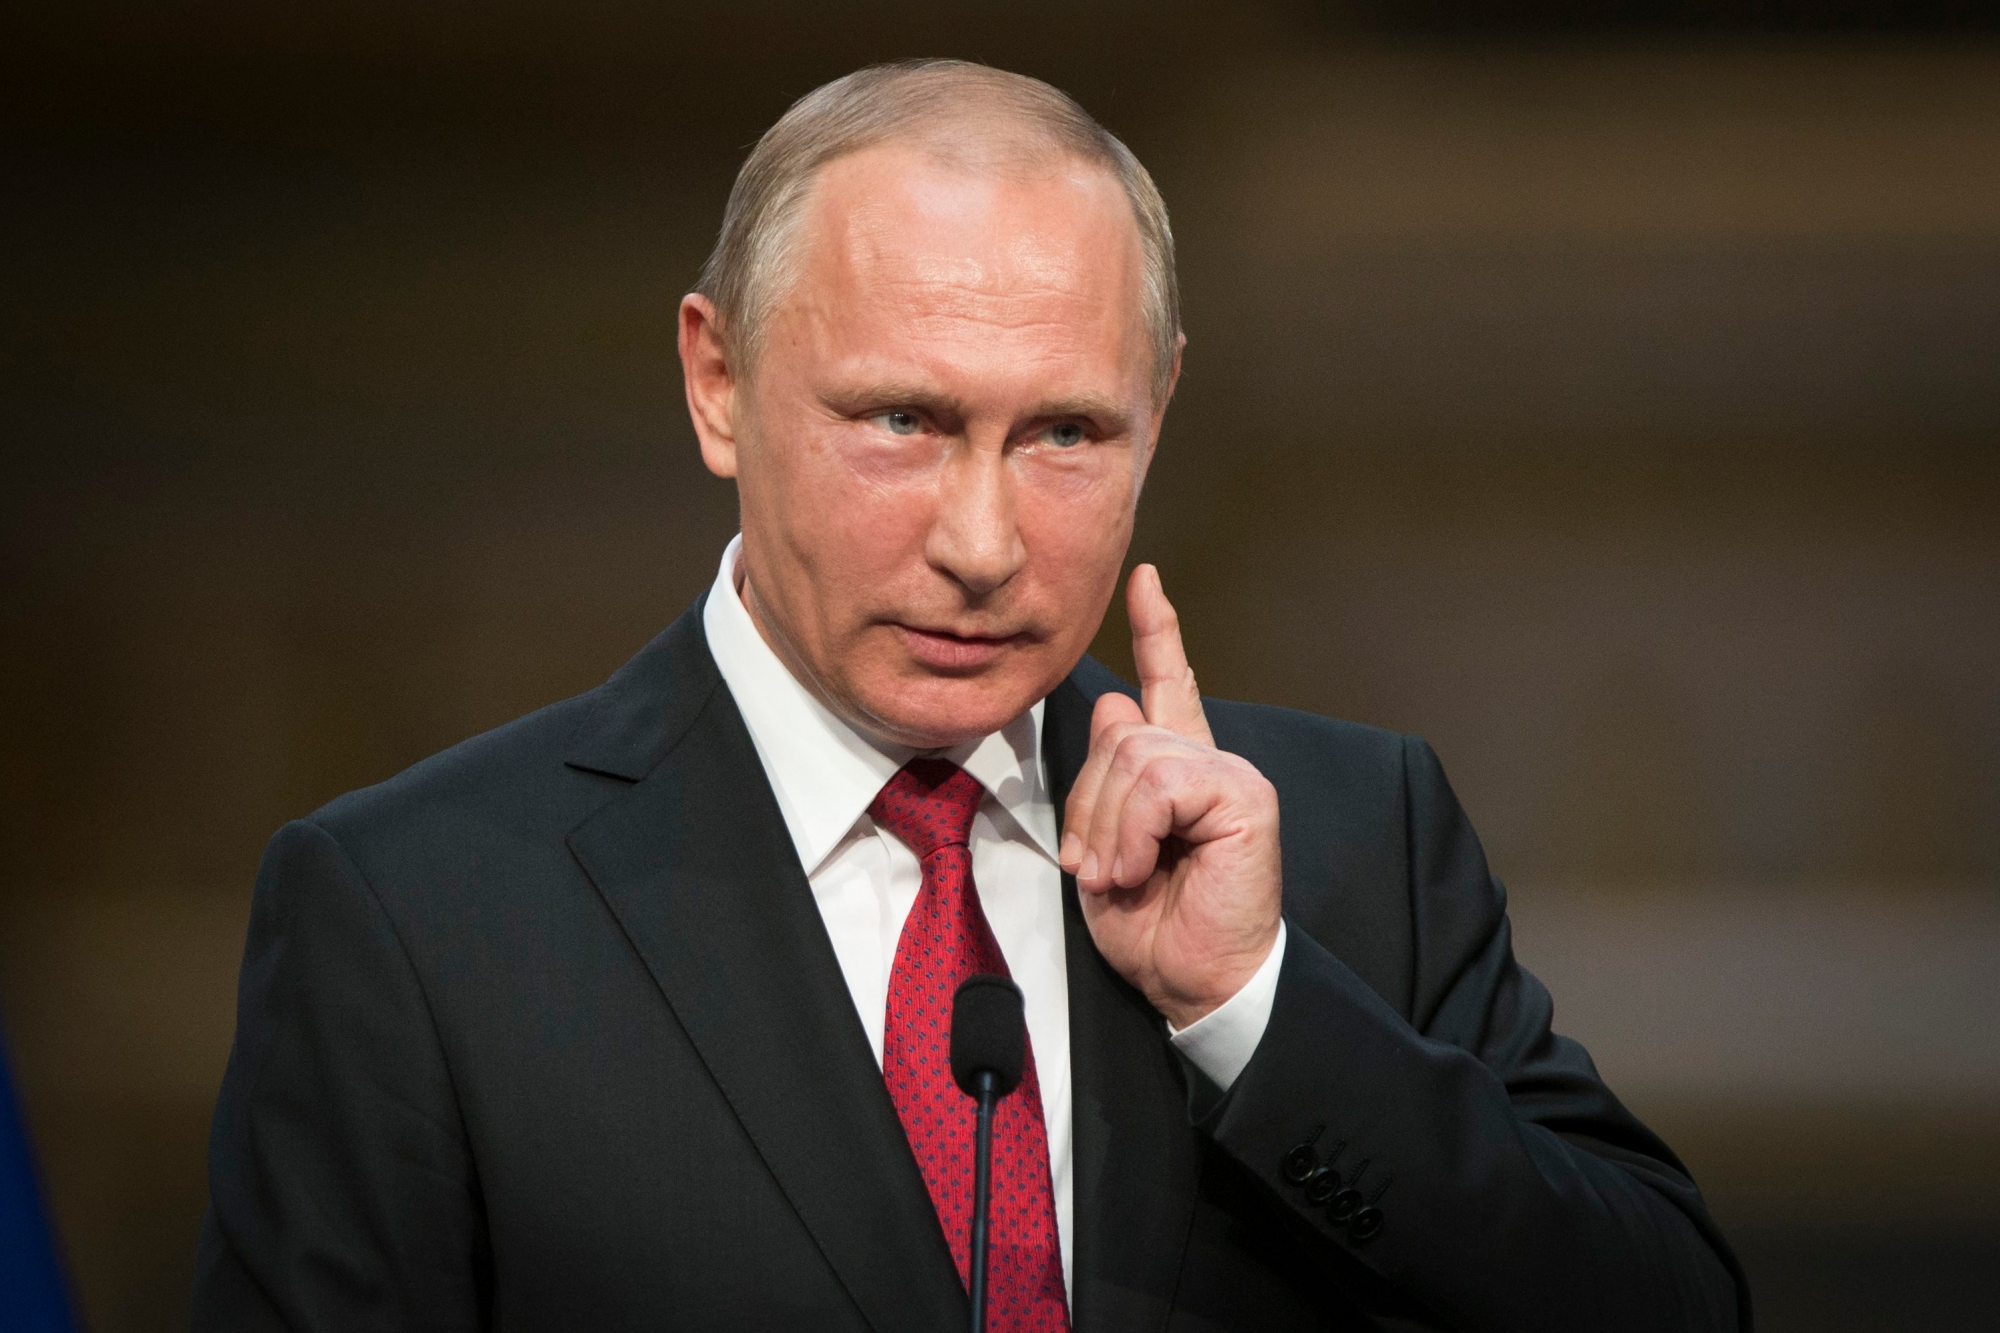 In this photo taken on Monday, May 29, 2017, Russian President Vladimir Putin gestures as he speaks during a shared news conference with French President Emmanuel Macron at the Palace of Versailles, near Paris, France. Putin says the allegations of Russian meddling in the U.S. presidential election are "fiction" invented by the Democrats in order to explain their loss. (AP Photo/Alexander Zemlianichenko) Trump Russia Probe